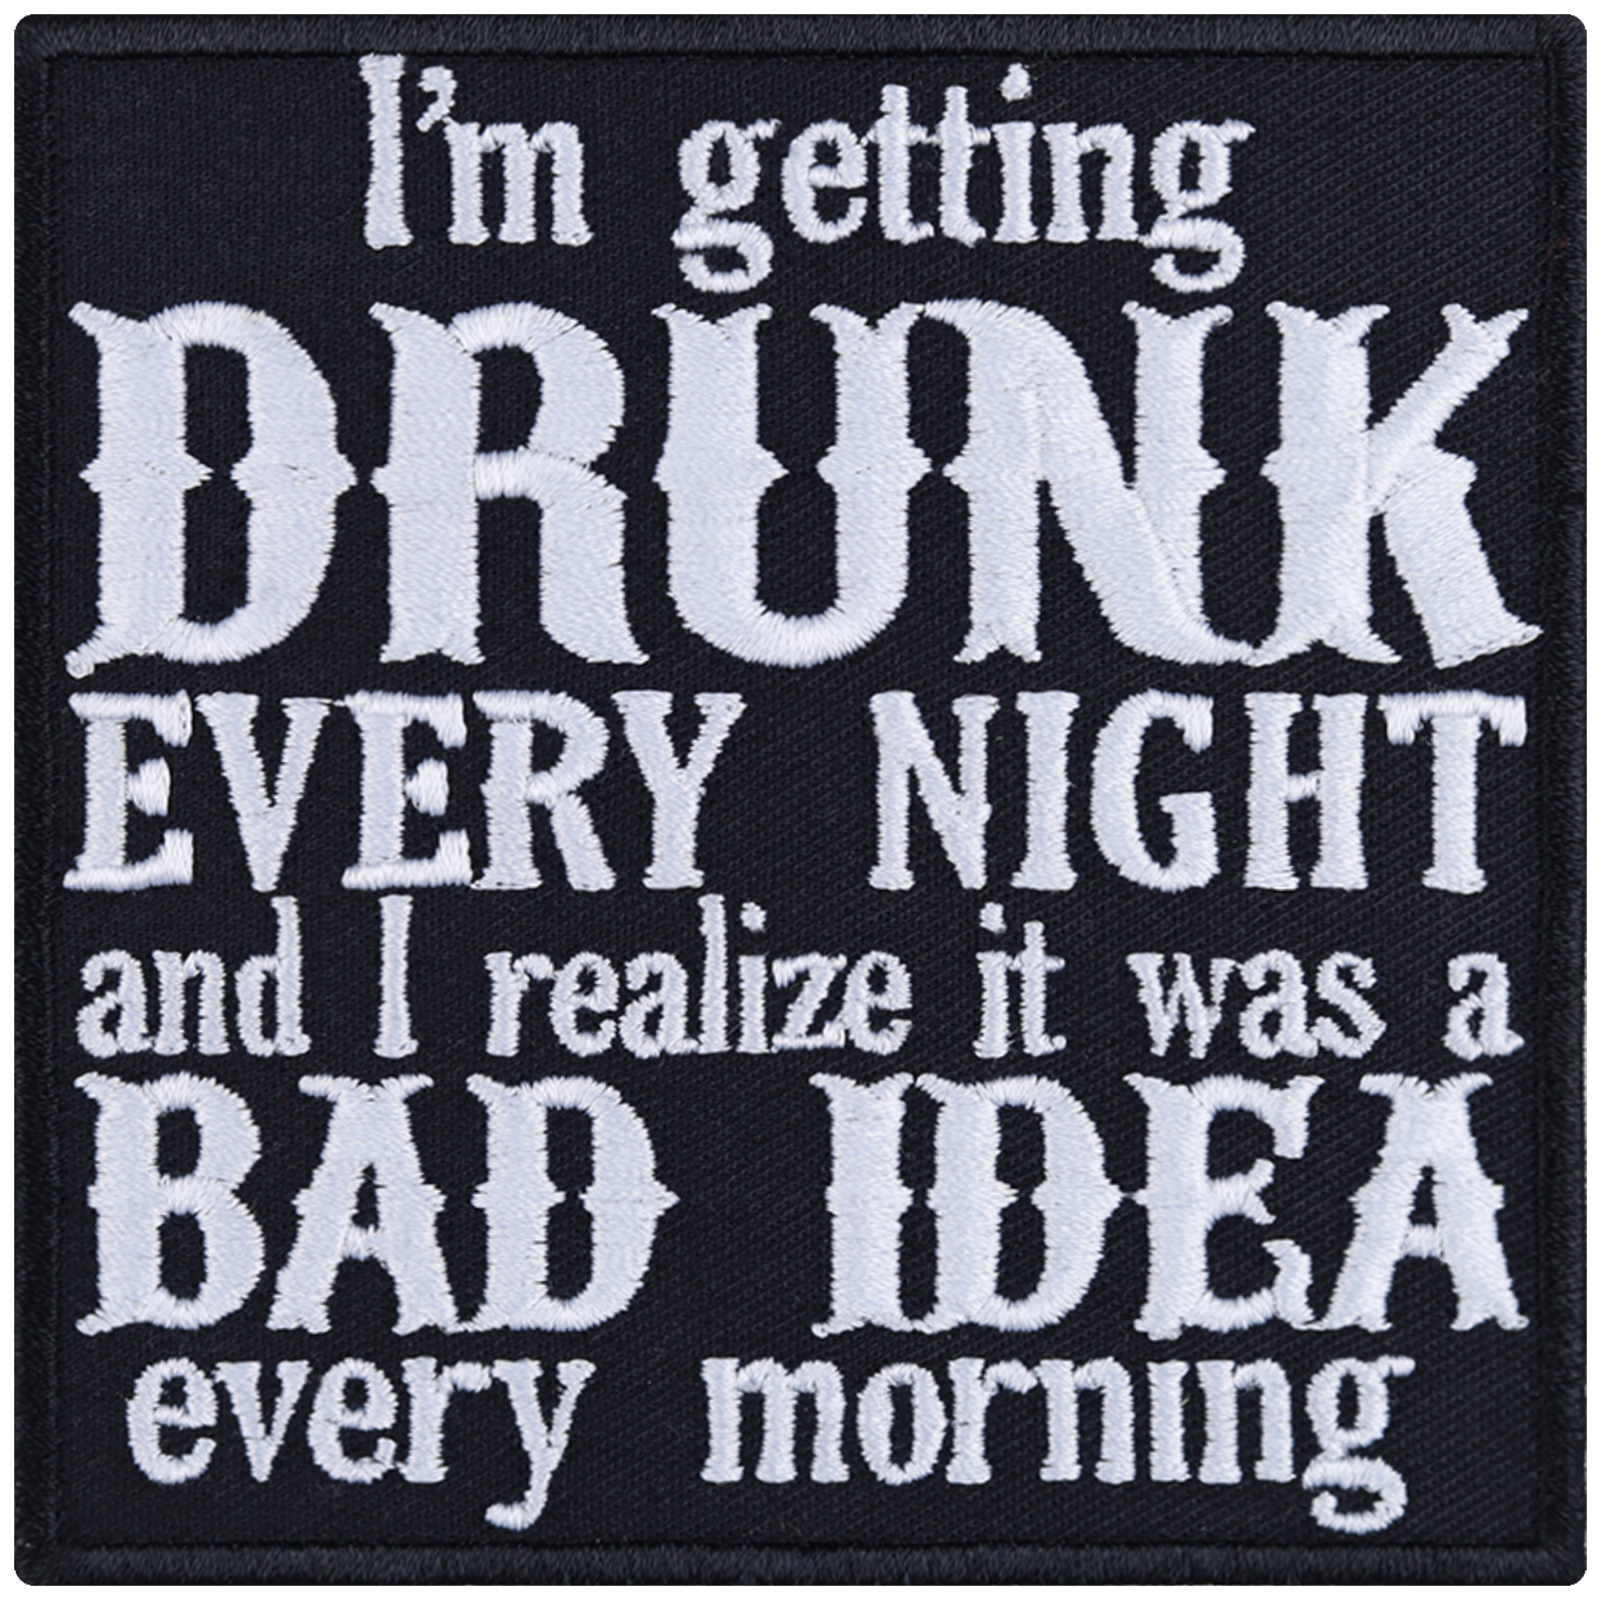 I'm getting drunk every night and I realize it was a bad idea every morning - Patch